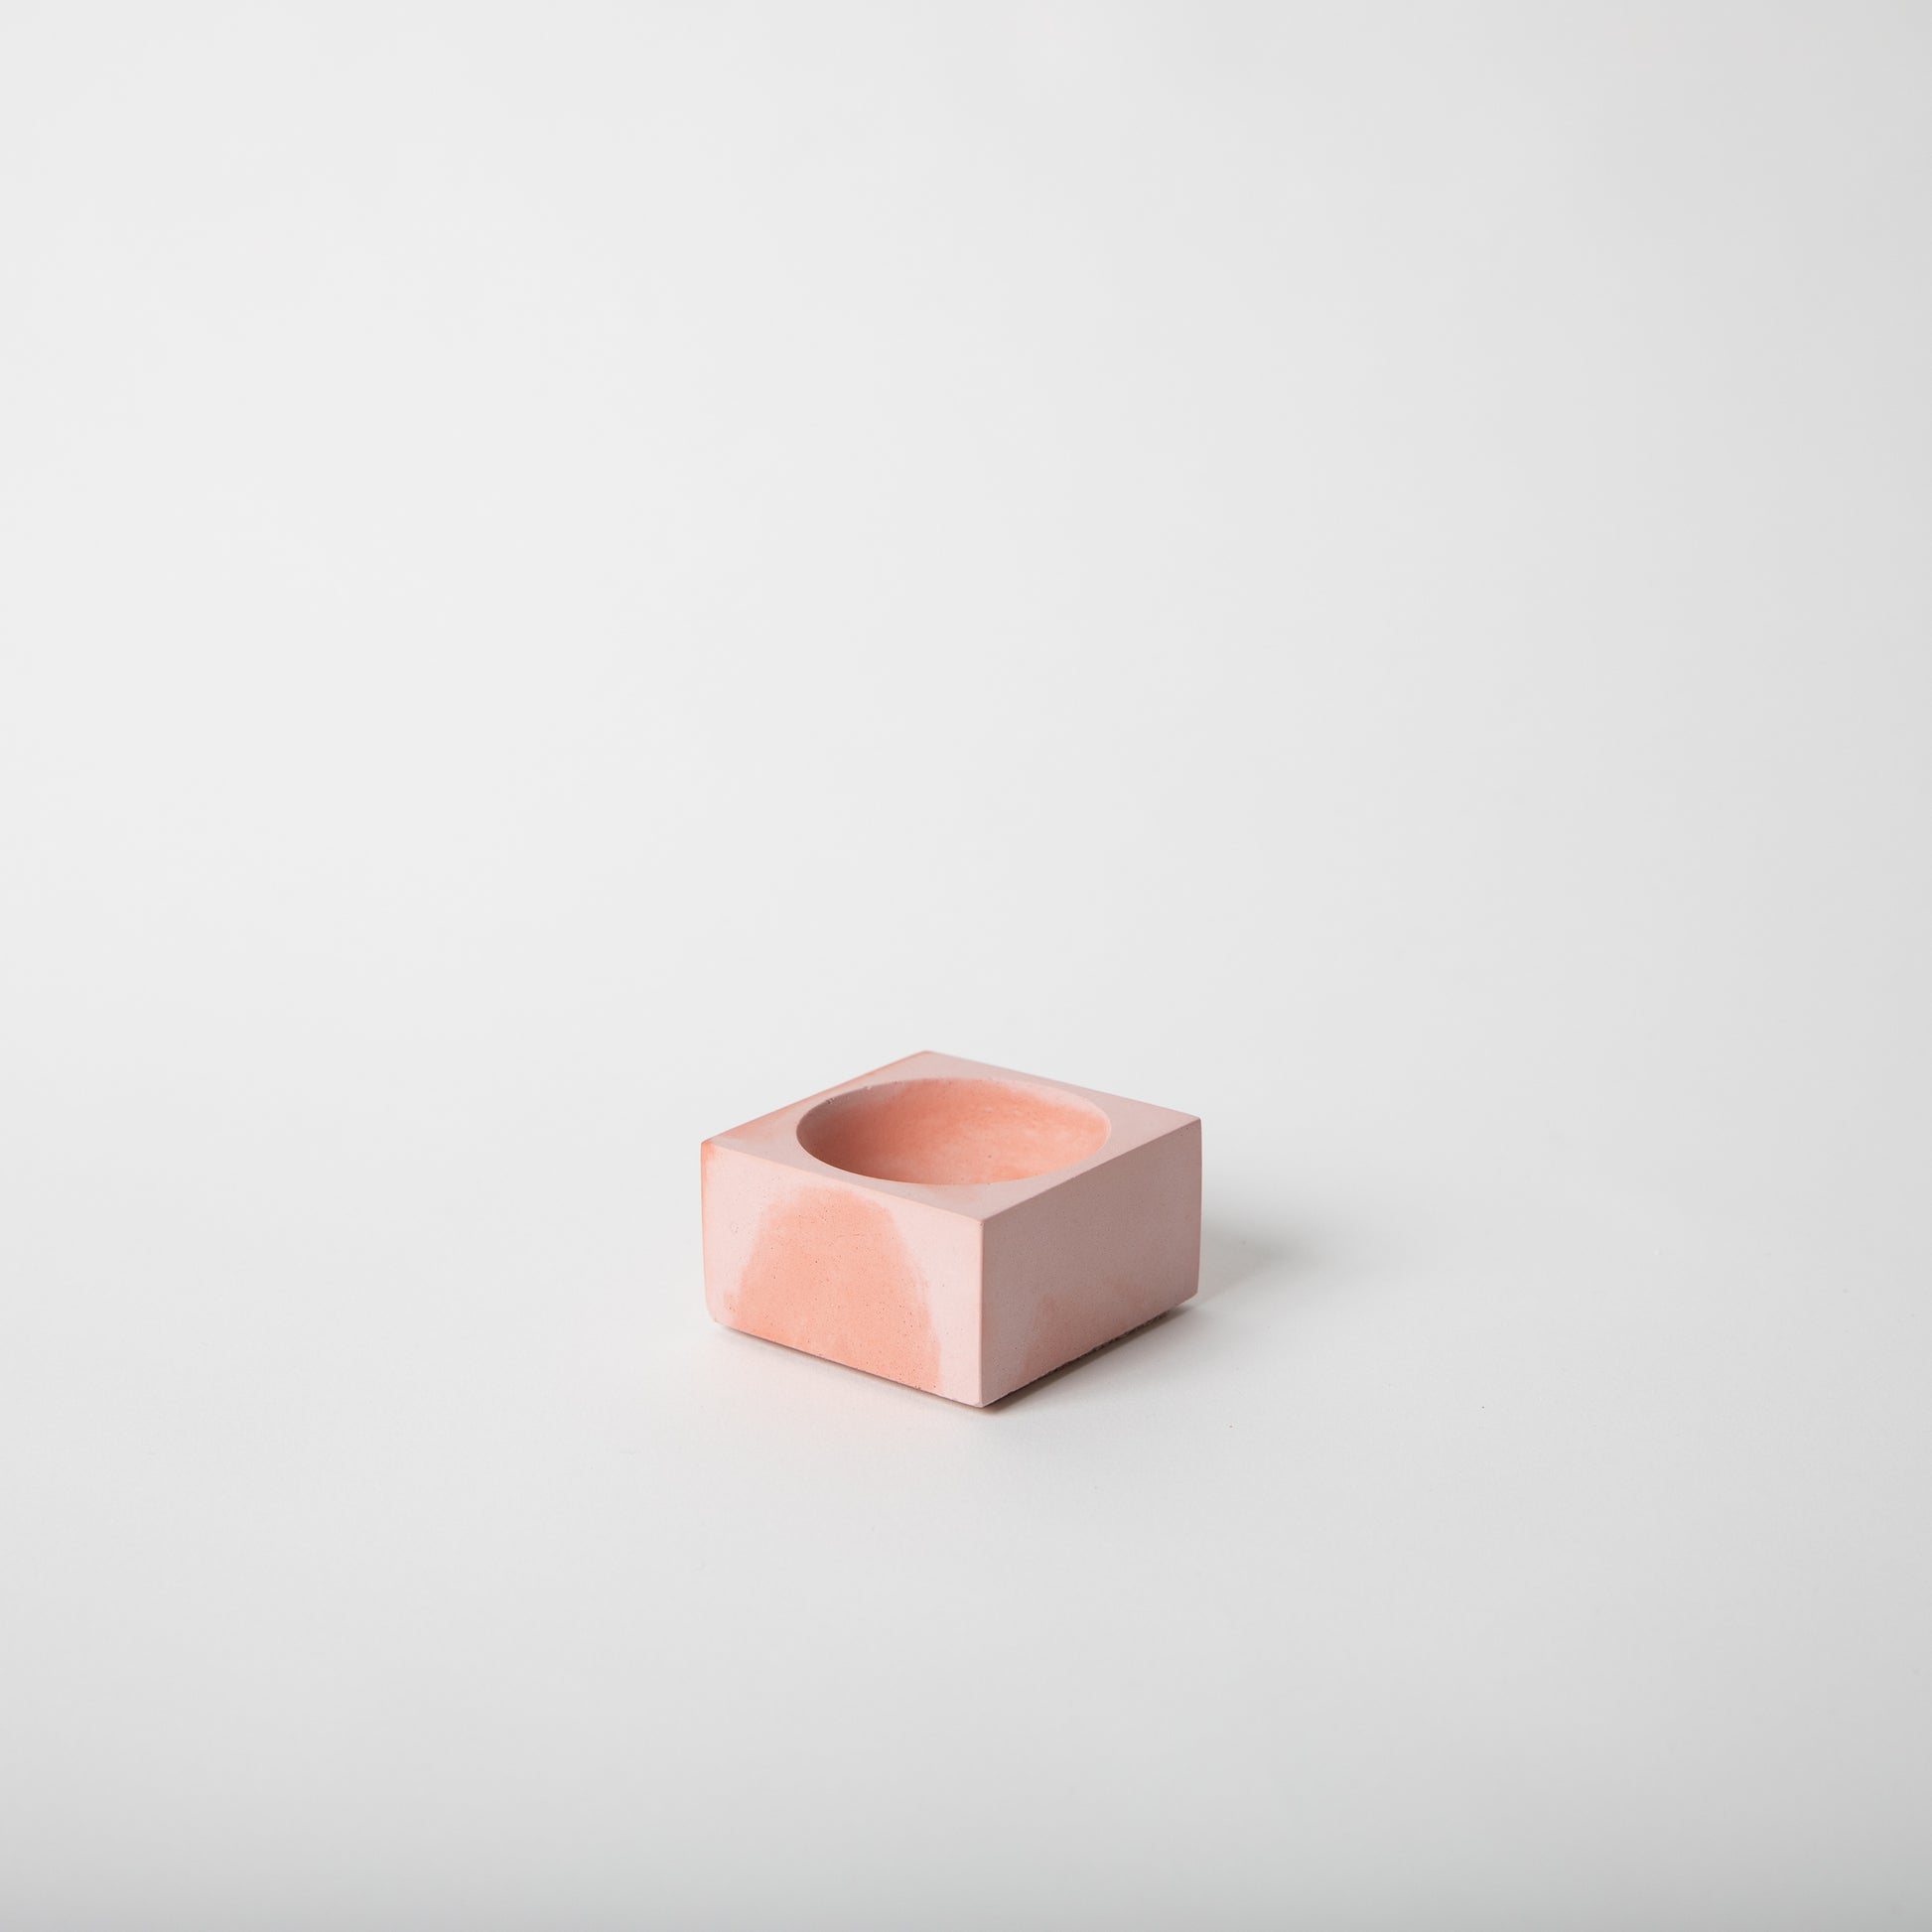 Square concrete incense holder in pink and coral.